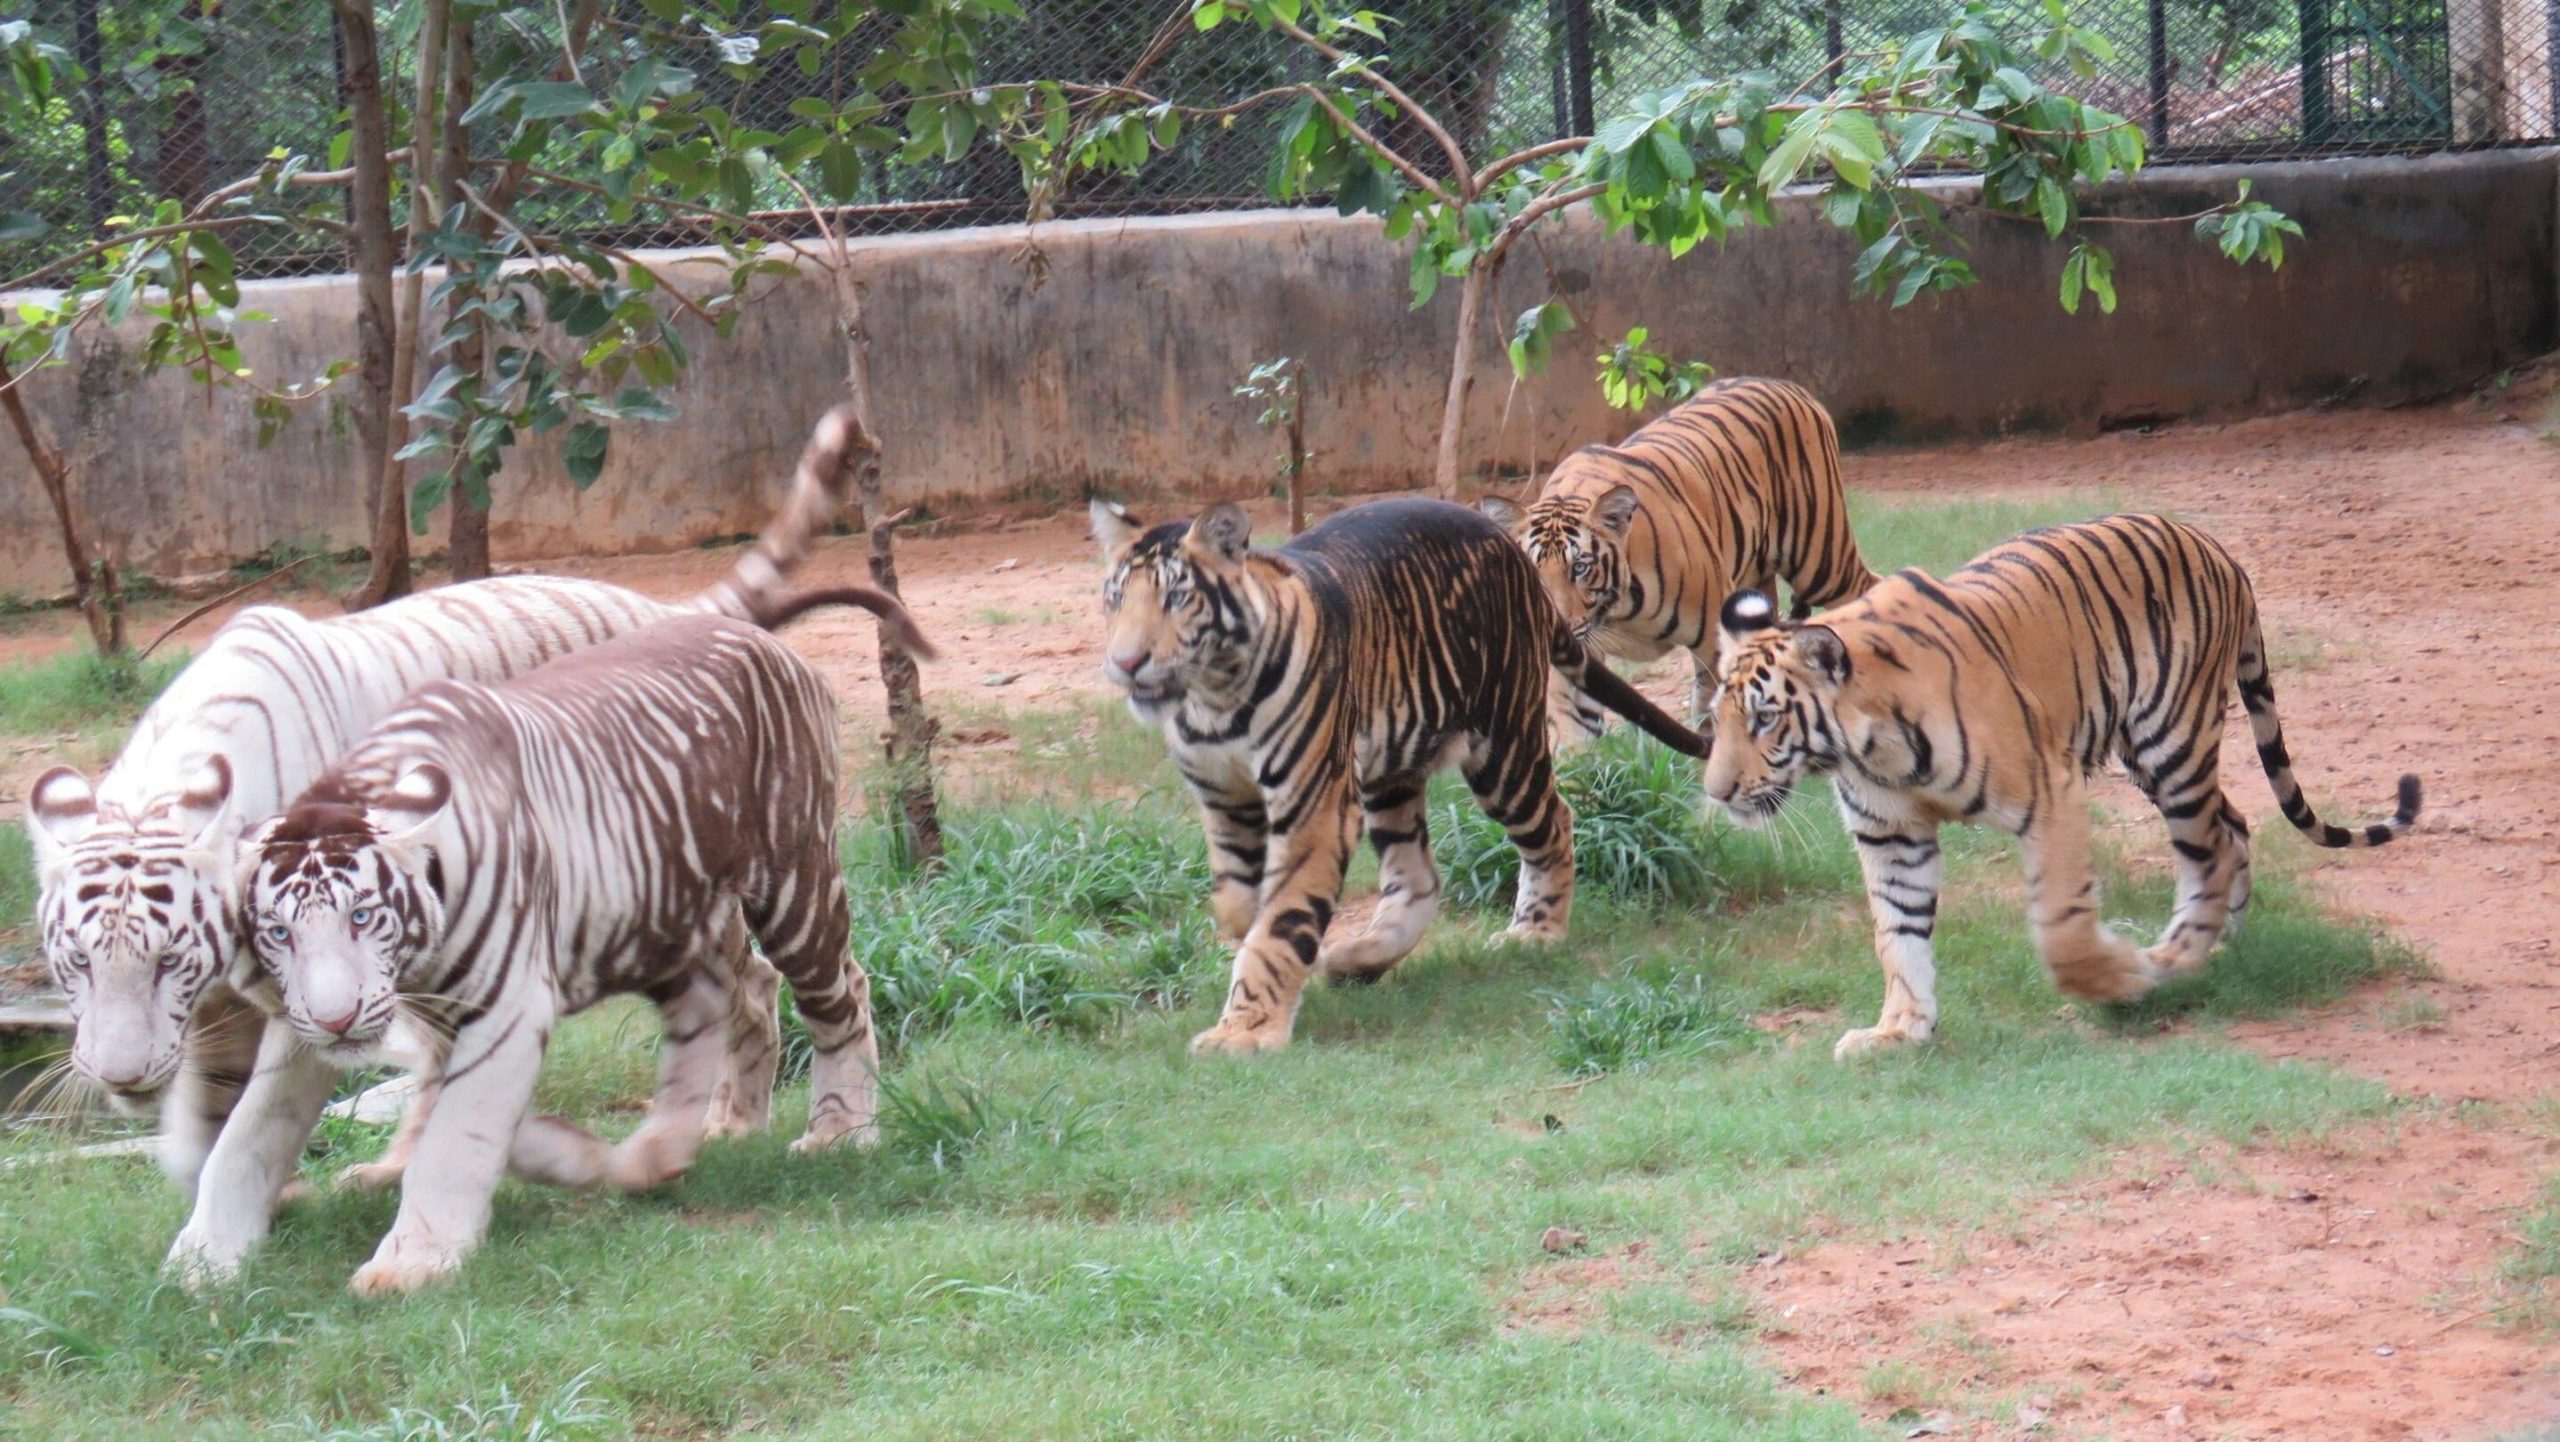 India’s ‘Black Tigers’ Have Unusually Thick Stripes Thanks to a Genetic Mutation